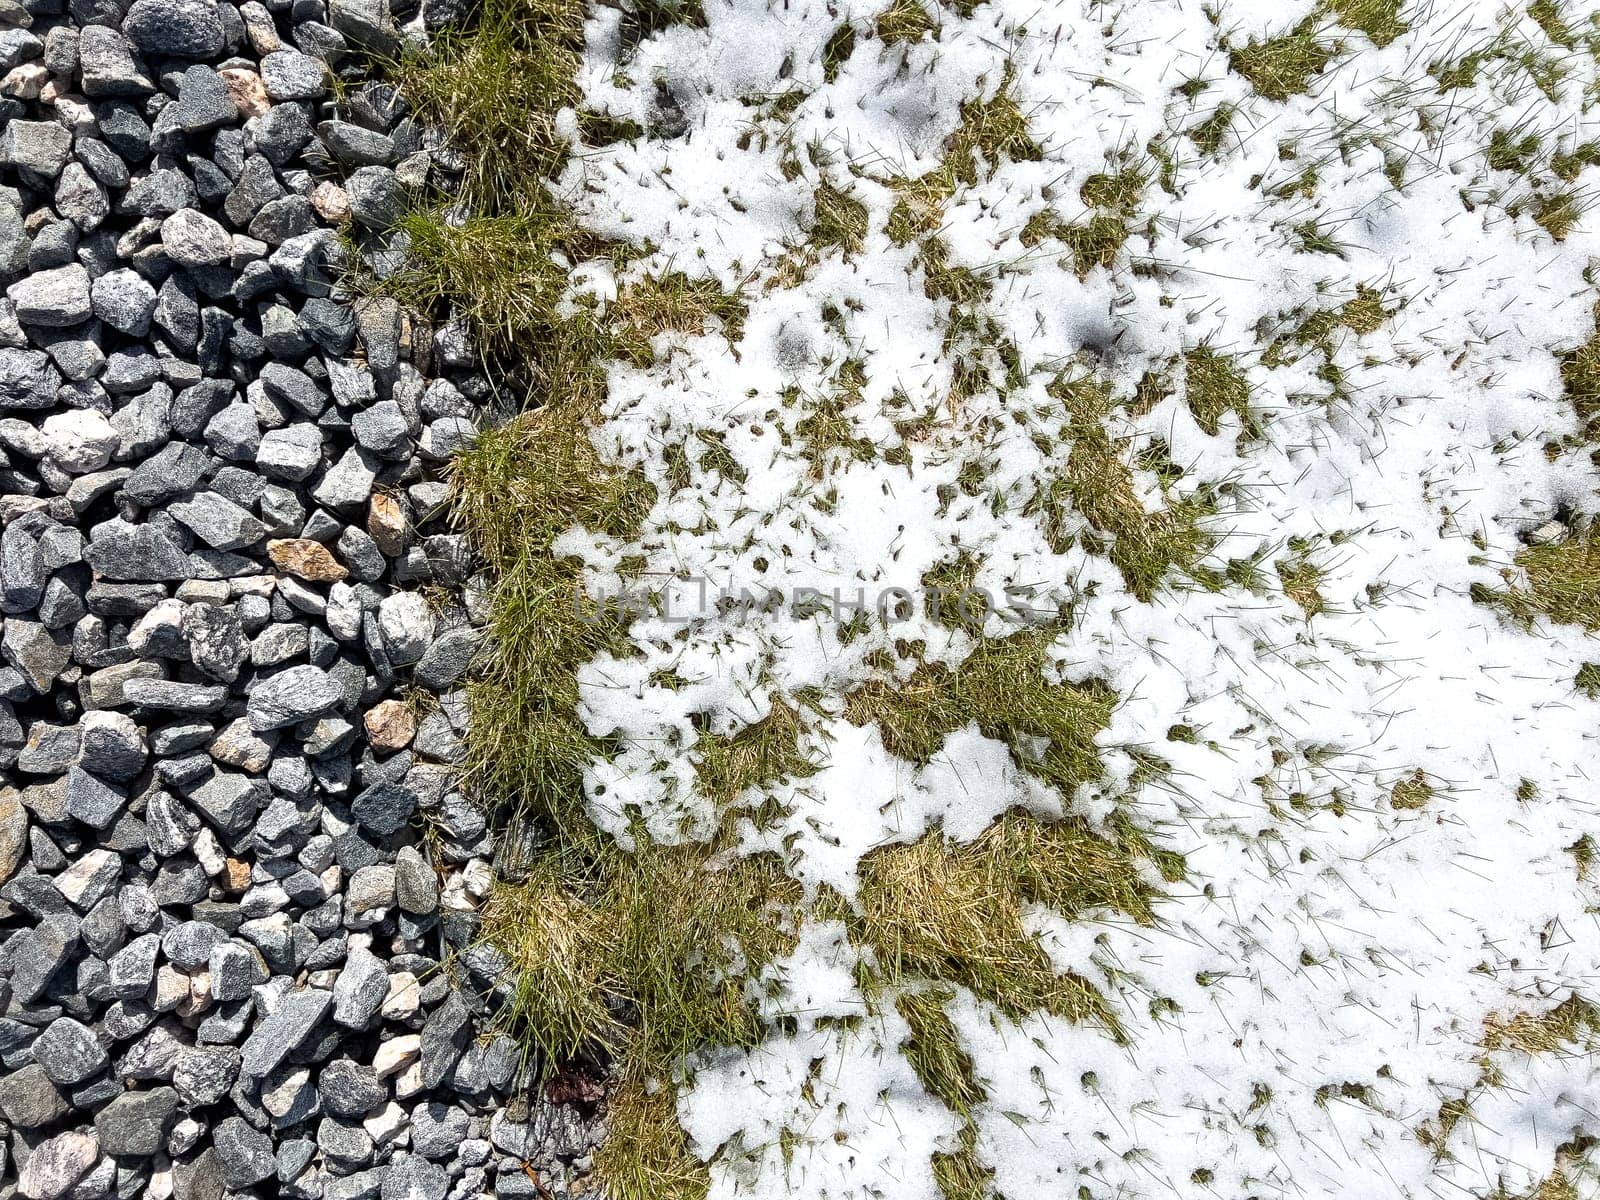 An image showing the remnants of a spring snowstorm on a suburban landscape, where melting snow meets the contrasting textures of gravel and green grass.